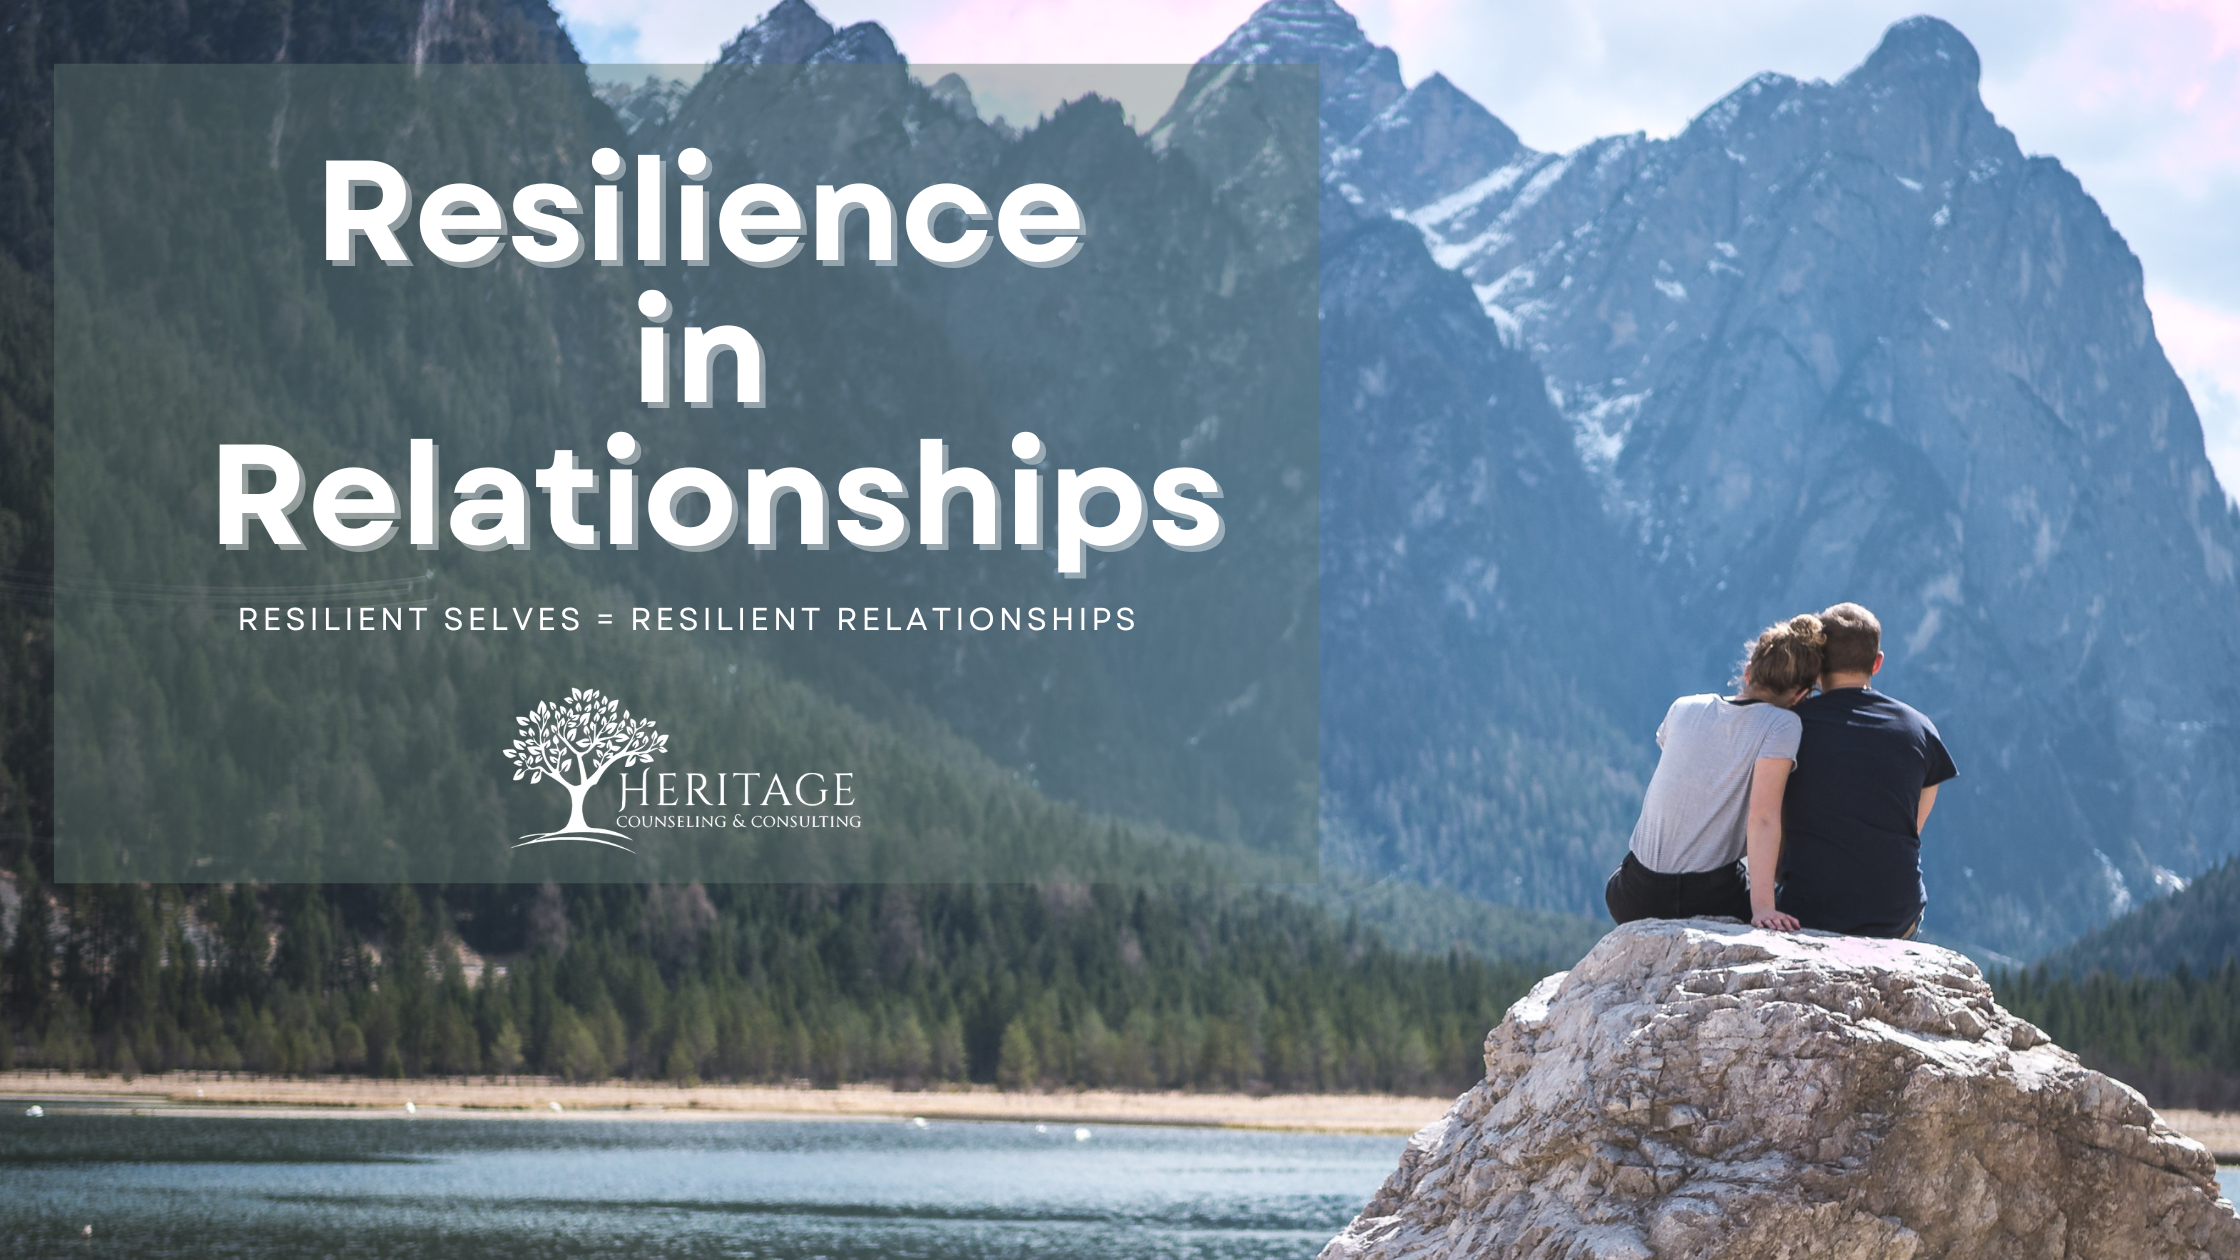 Resilience in Relationships